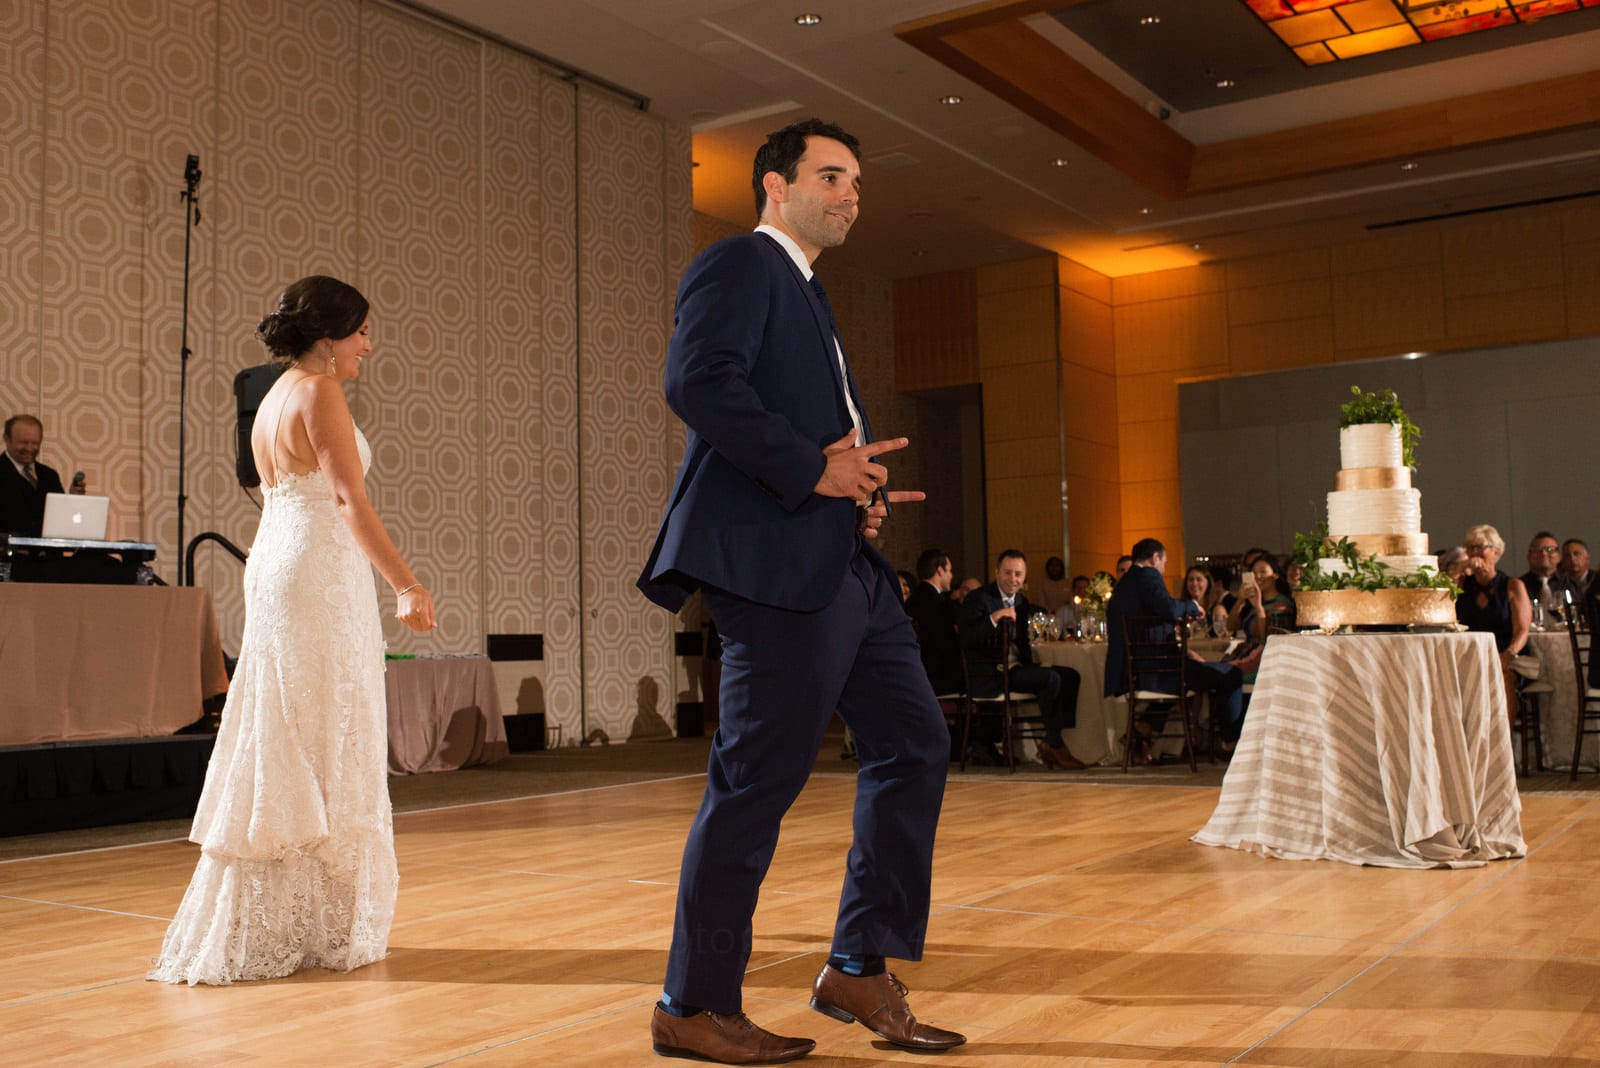 A groom in a blue suit dances with his hands like six-shooters while his bride laughs during their Wedding Photography at Fairmont Hotel Pittsburgh.